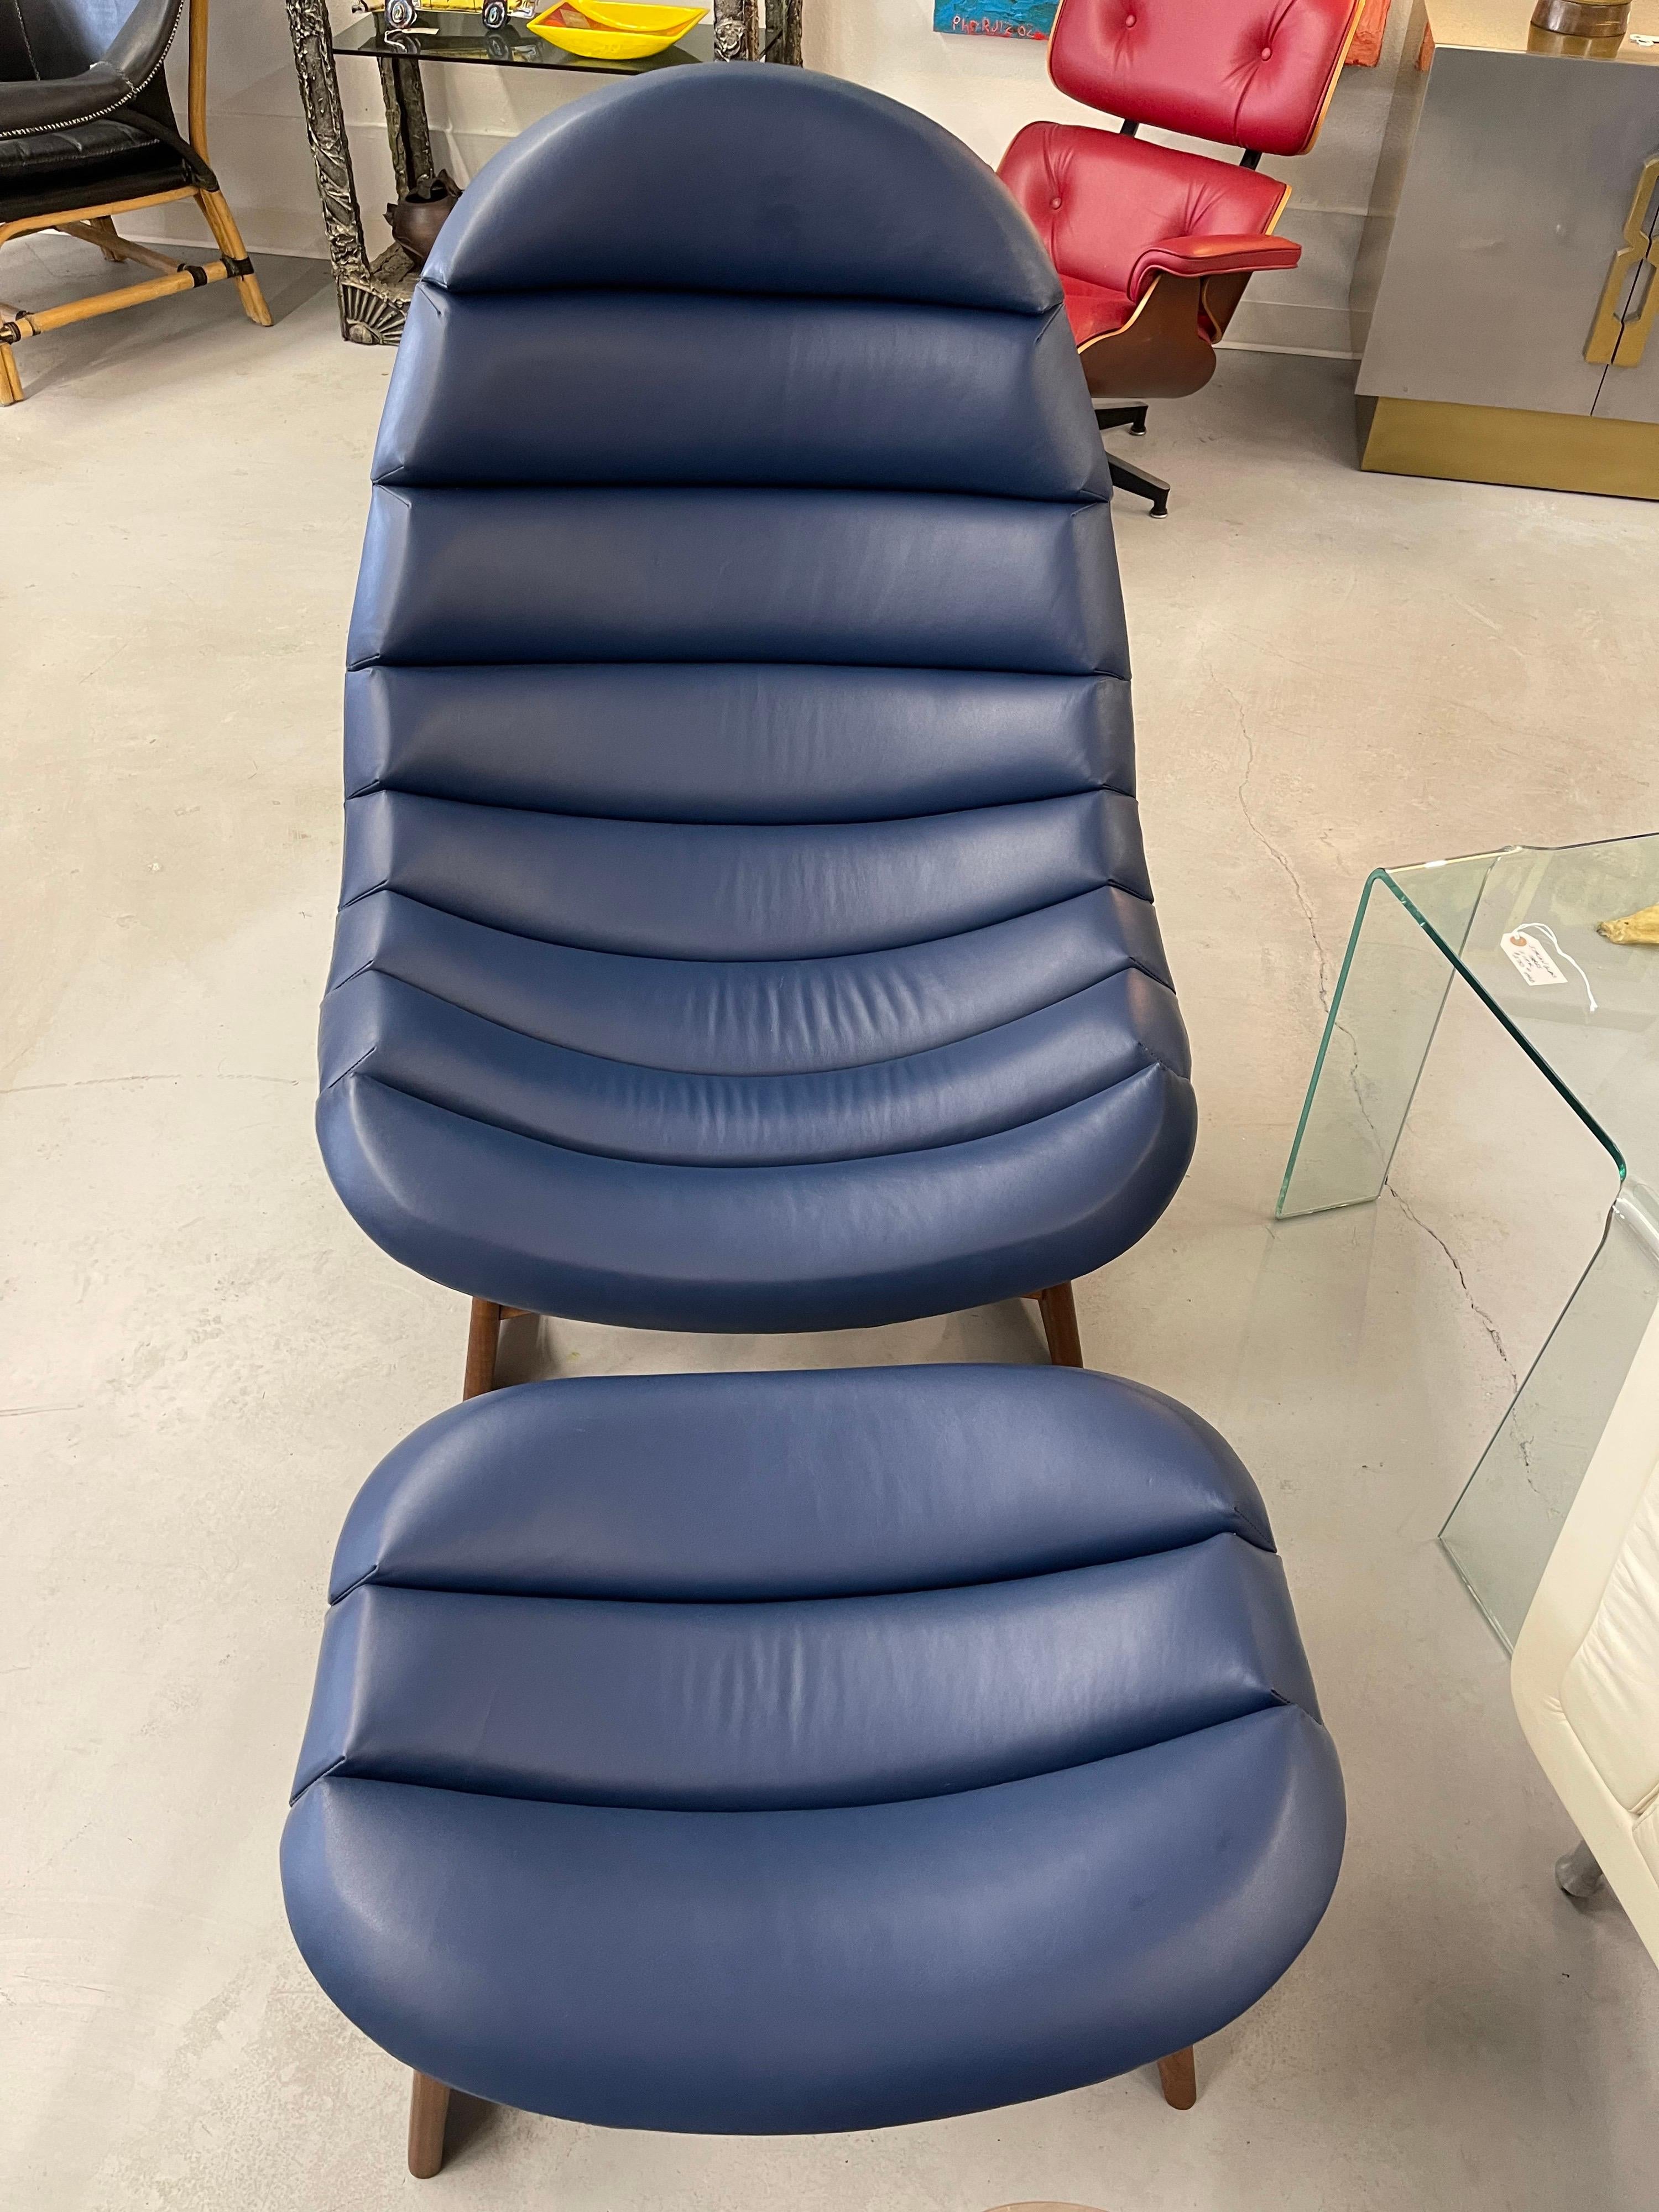 A stunning leather lounge chair and ottoman designed by Adrian Pearsall for Craft Associates. Features beautifully grained walnut bases. These chairs have been redone and reupholstered in a pretty blue leather at some point. Nicely channeled in good